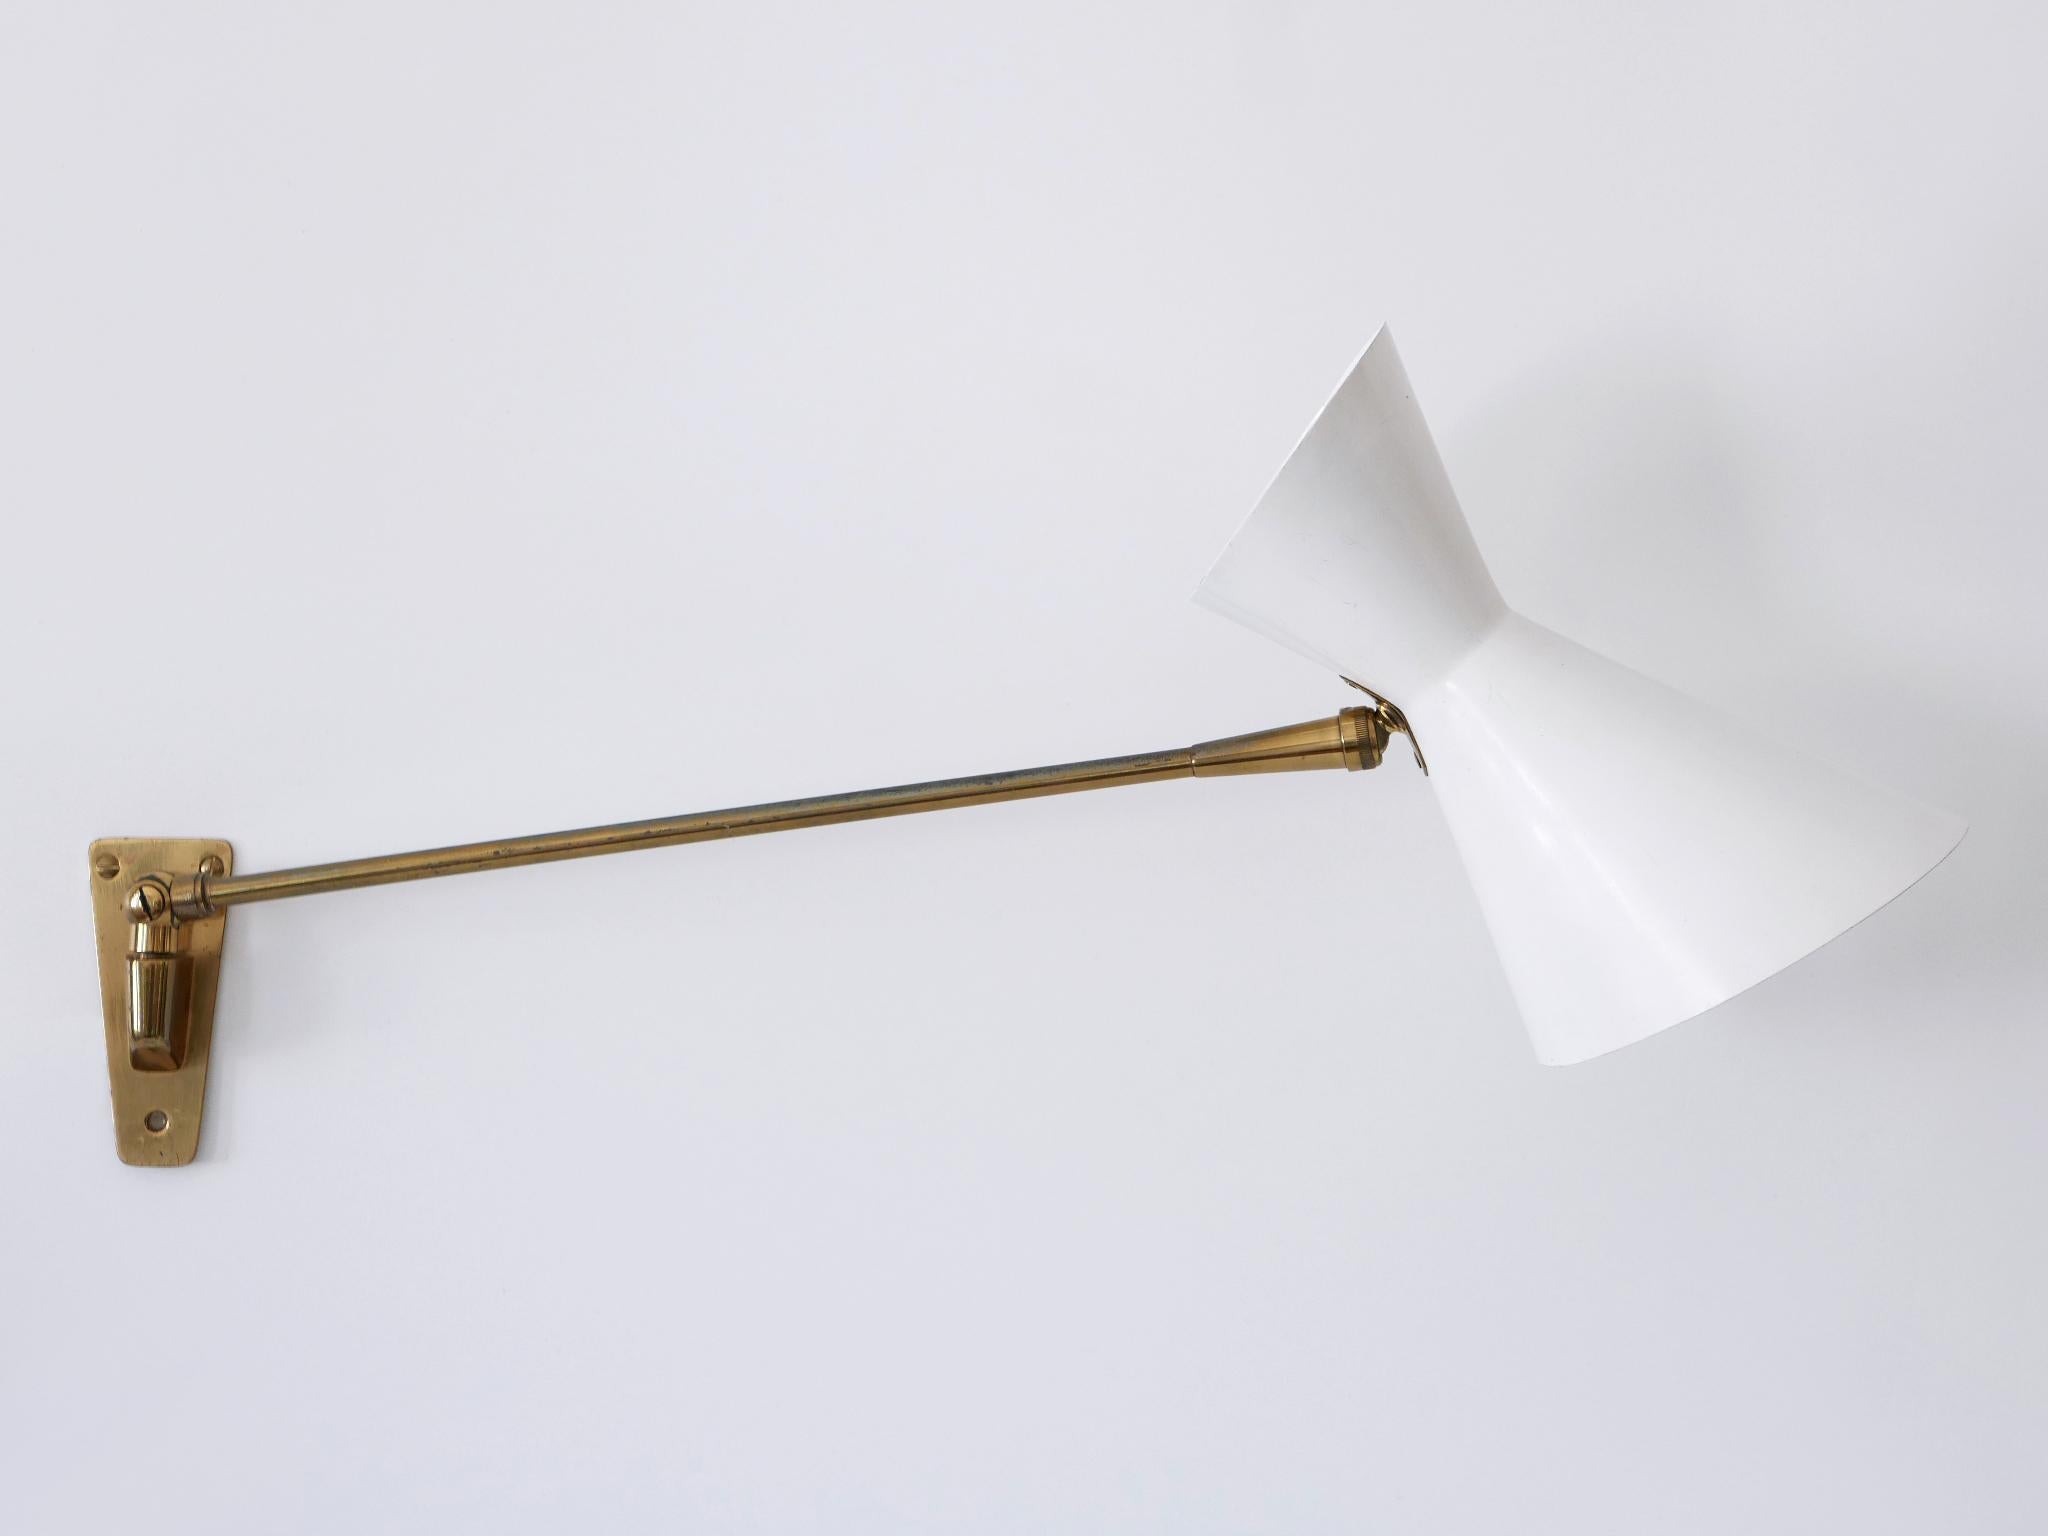 Elegant Mid Century Articulated Diabolo Wall Lamp by Belmag Switzerland 1950s For Sale 4